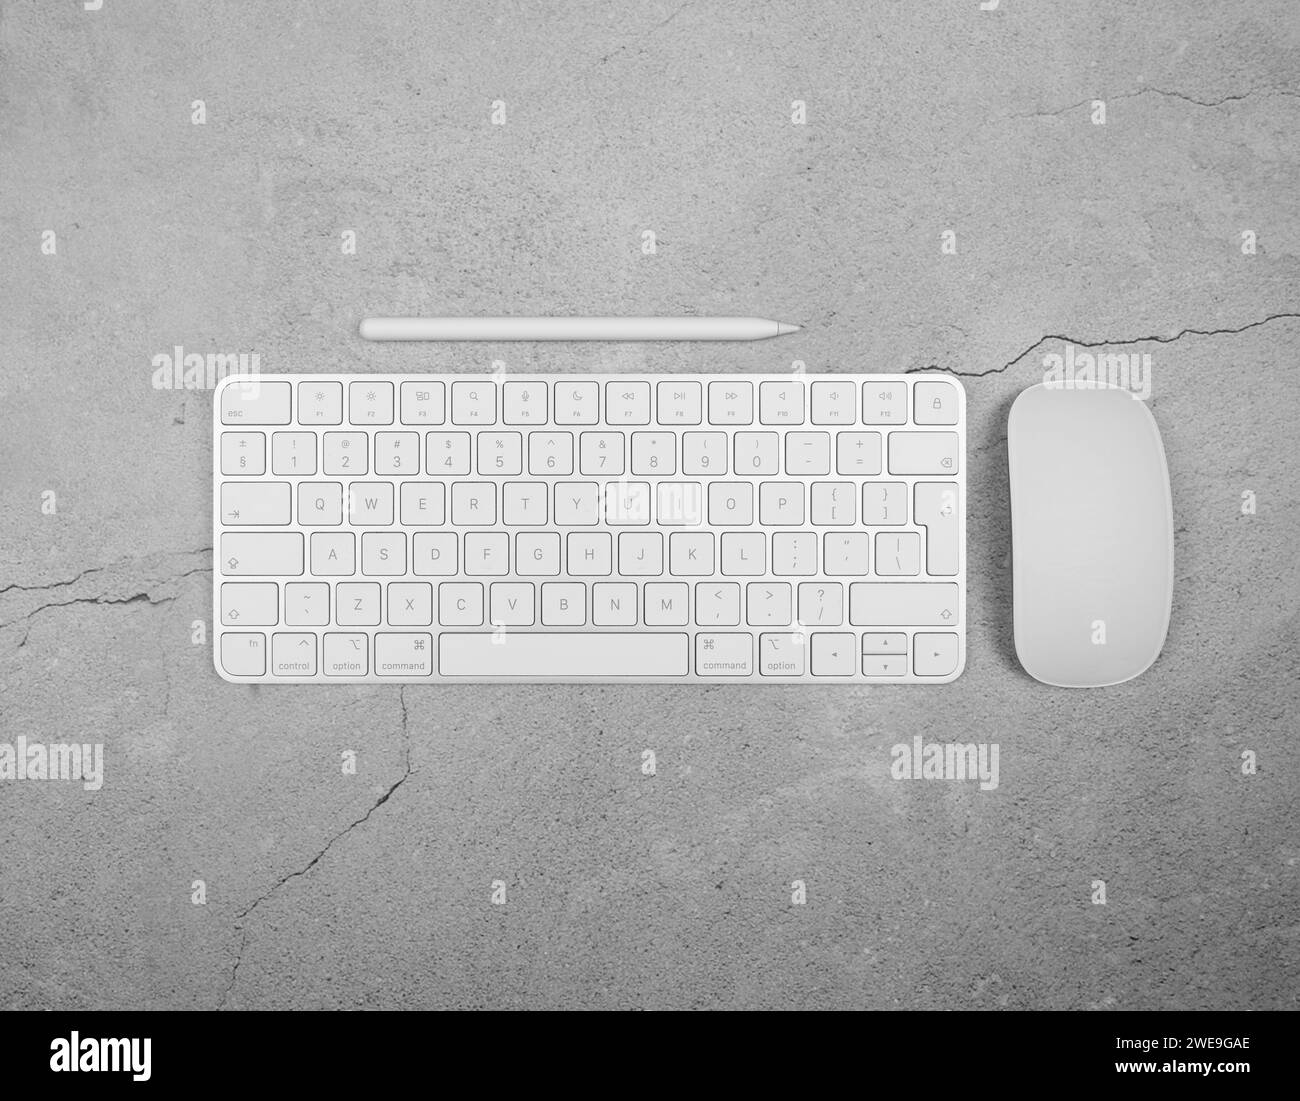 Top view of white keyboard, mouse and pen on concrete background. Modern office flat lay, copy space. Stock Photo